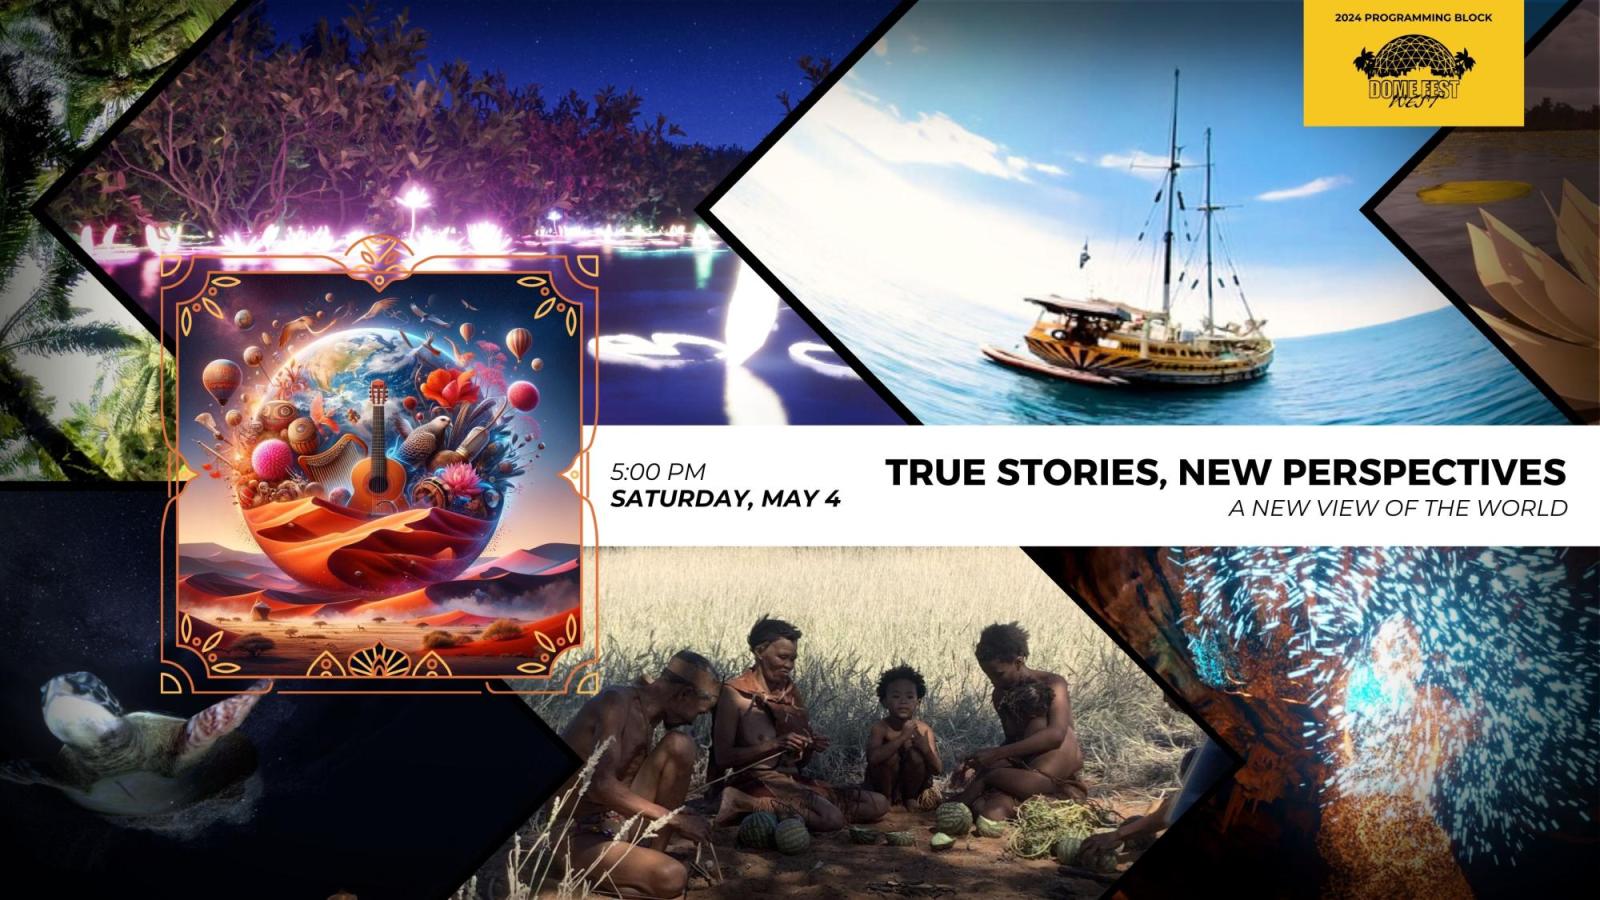 True Stories, New Perspectives text with Dome Fest West logo and 8 still images from the films